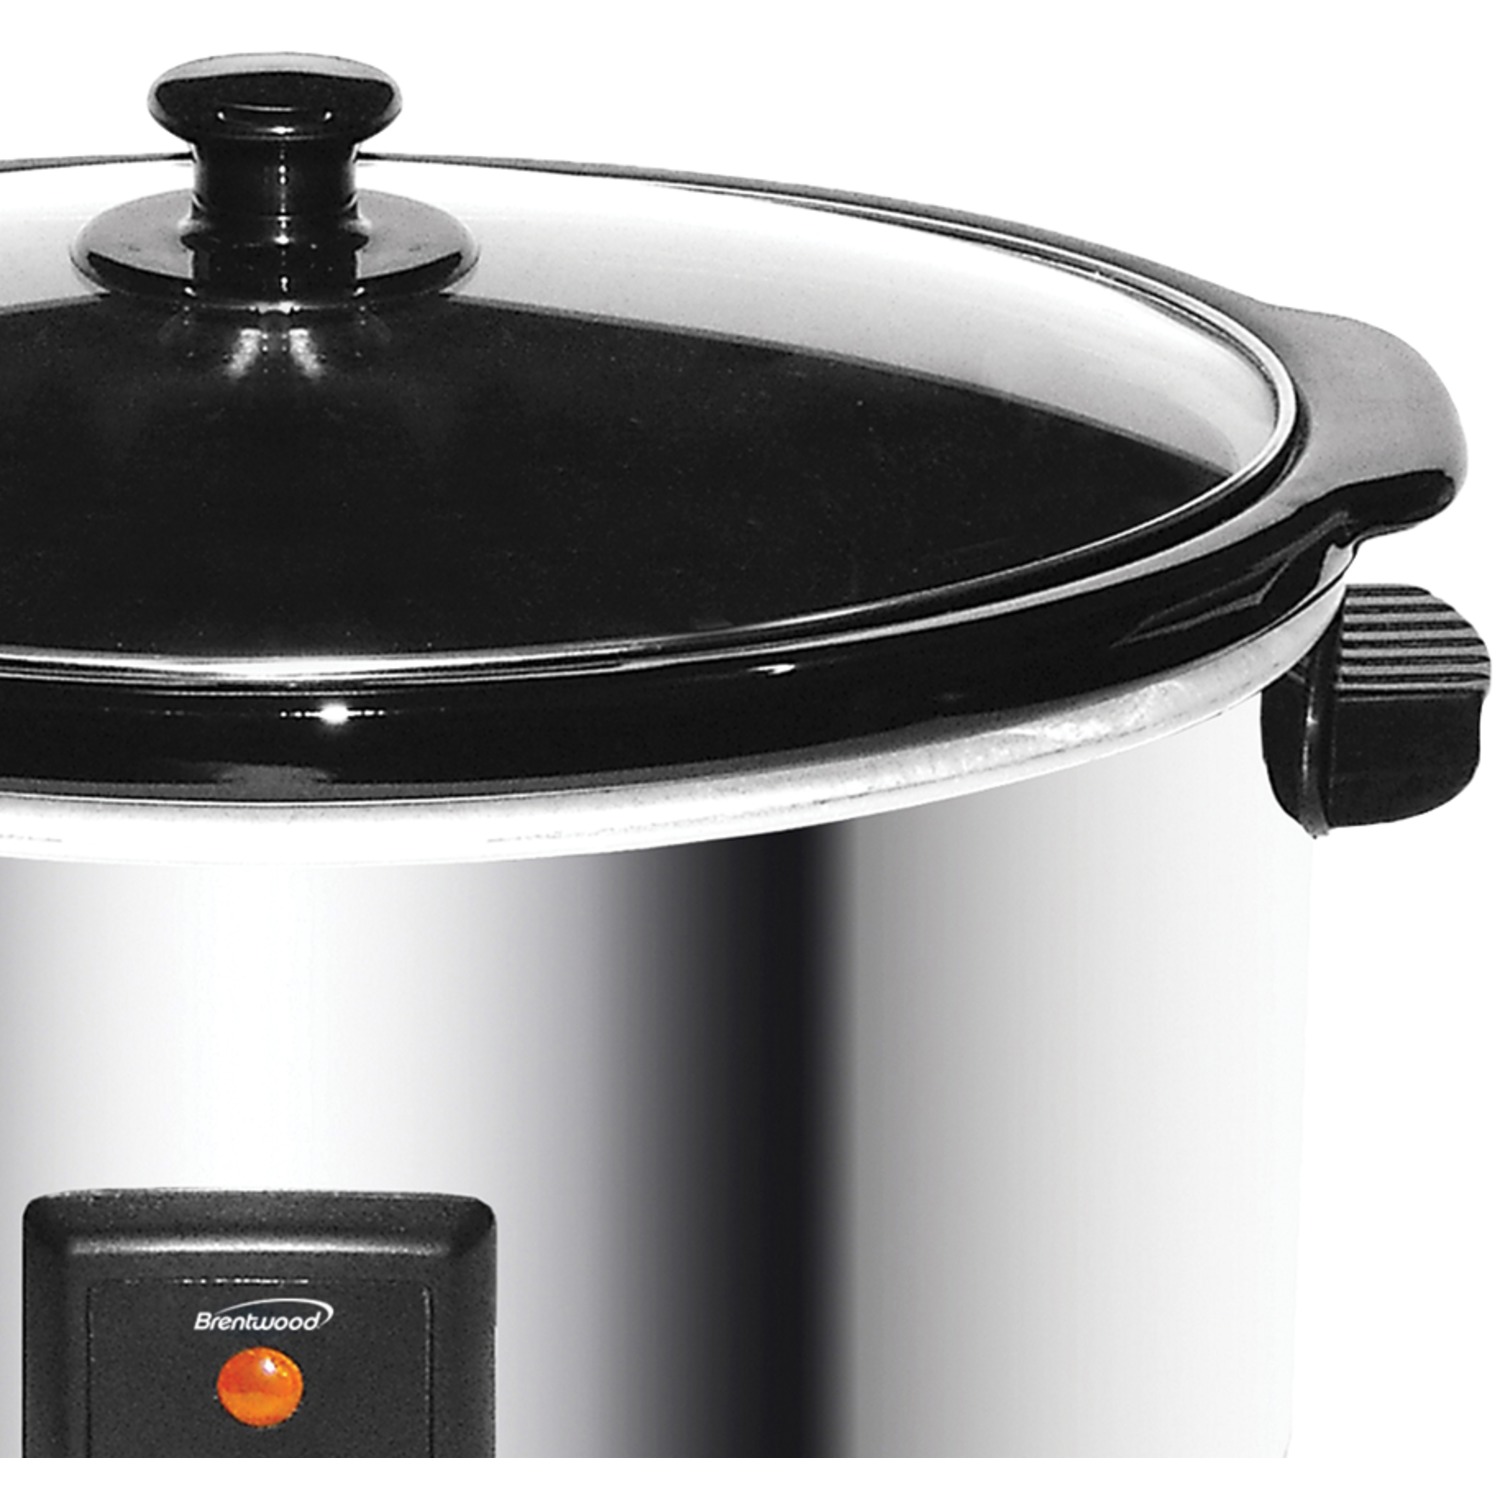 Brentwood SC-170S 8 Qt Slow Cooker Stainless Steel - image 3 of 8